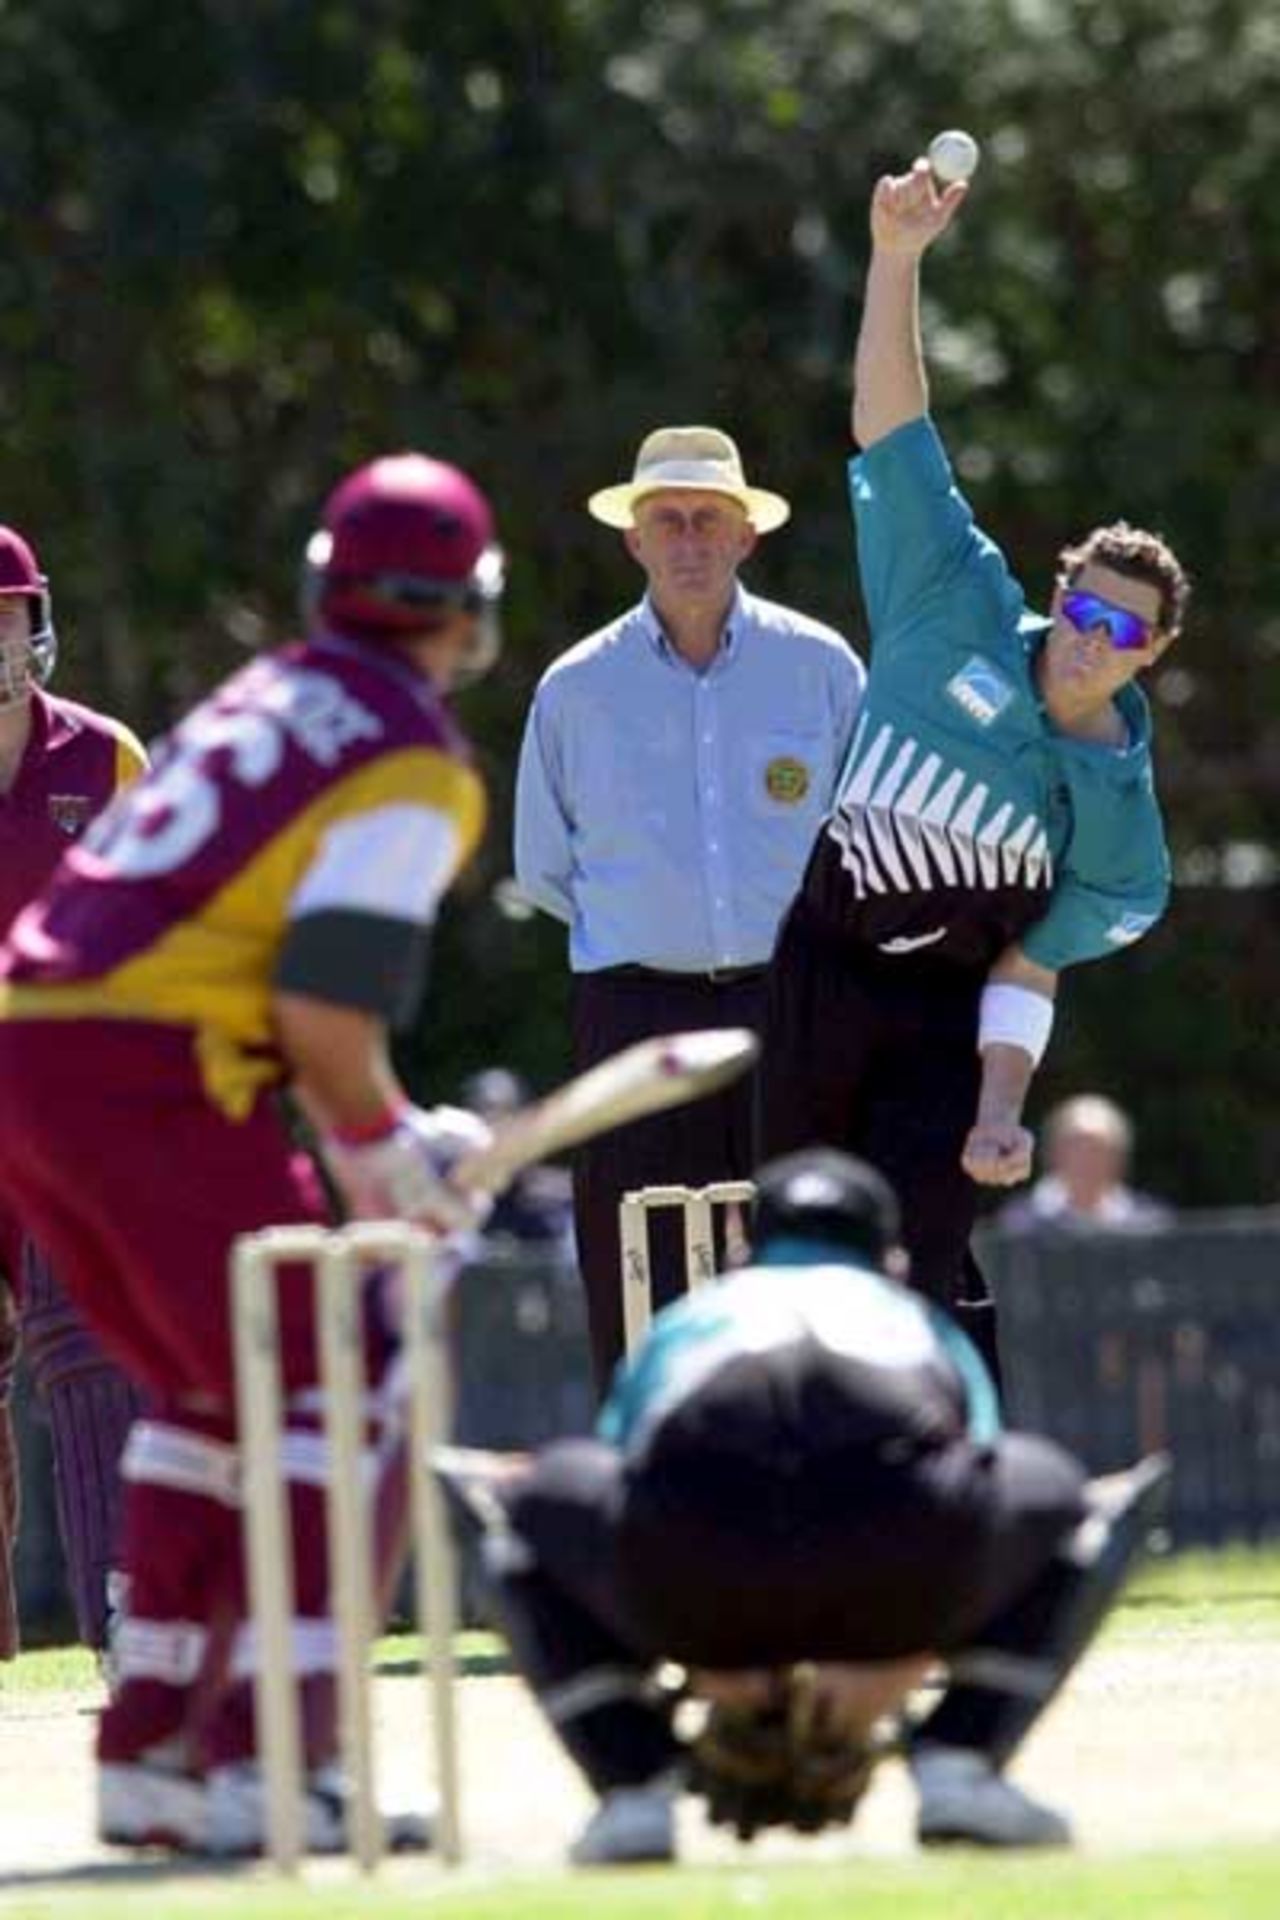 15 Aug 2000: Paul Wiseman of New Zealand in action bowling to Scott Prestwidge of Queensland during the New Zealand versus Queensland practice match at Allan Border Field in Brisbane, Australia.